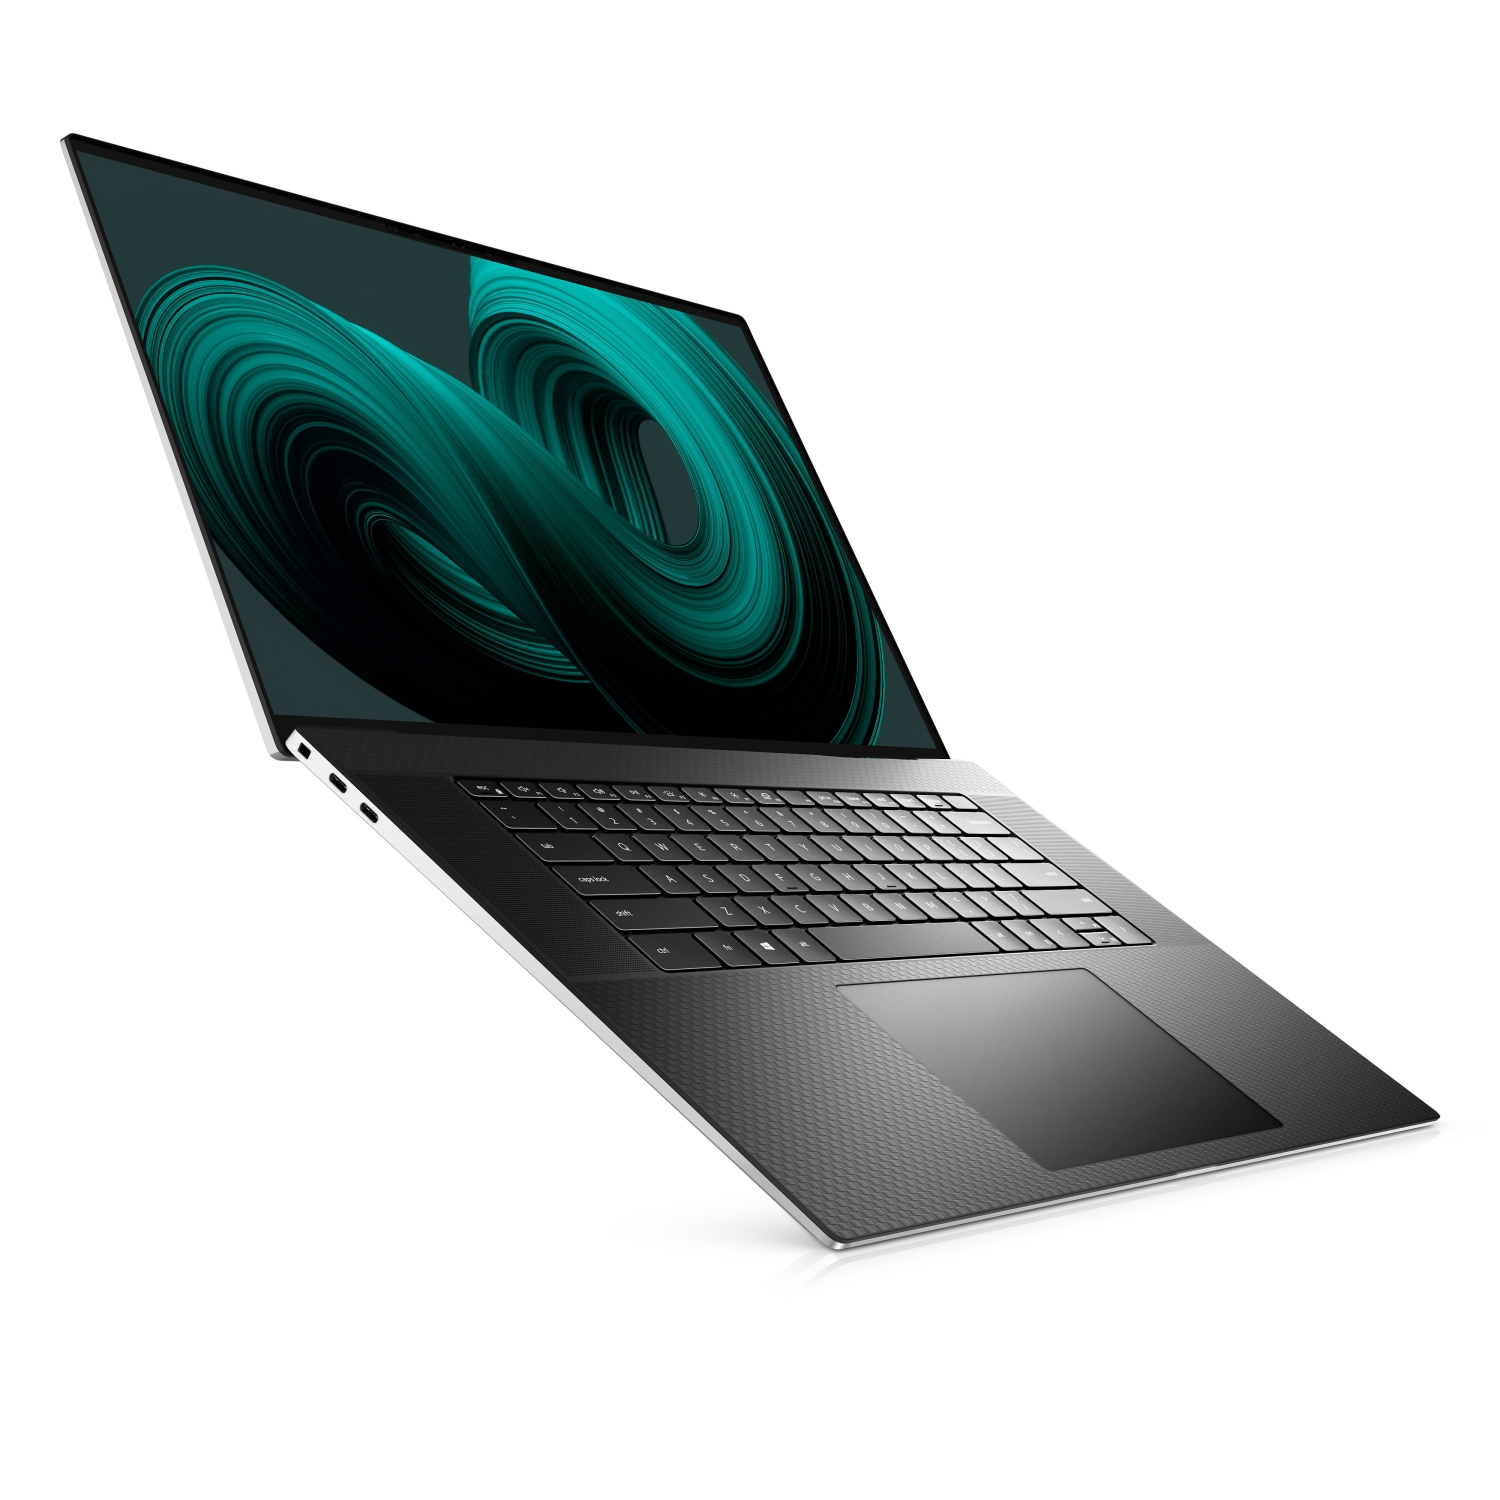 Refurbished (Excellent) - Dell XPS 17 9710 Laptop (2021) | 17" 4K Touch | Core i9 - 4TB SSD - 64GB RAM - RTX 3060 | 8 Cores @ 5 GHz - 11th Gen CPU Certified Refurbished